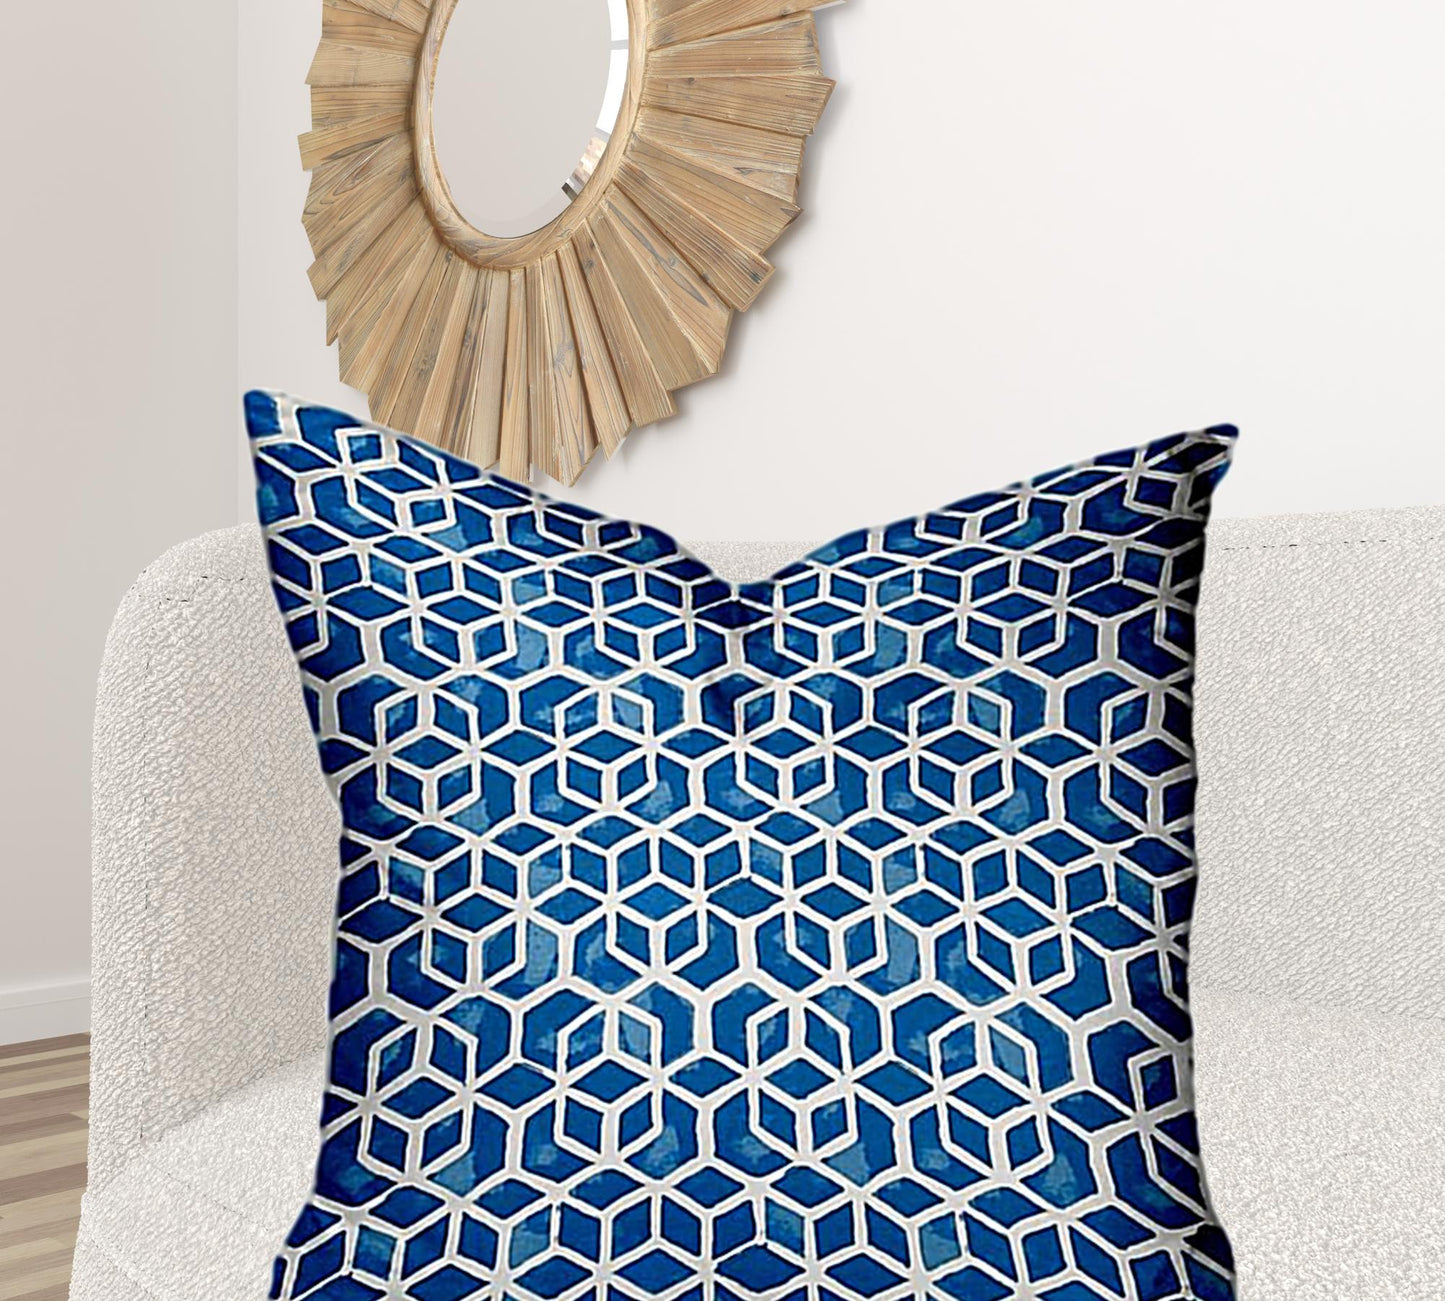 36" X 36" Blue And White Zippered Geometric Throw Indoor Outdoor Pillow